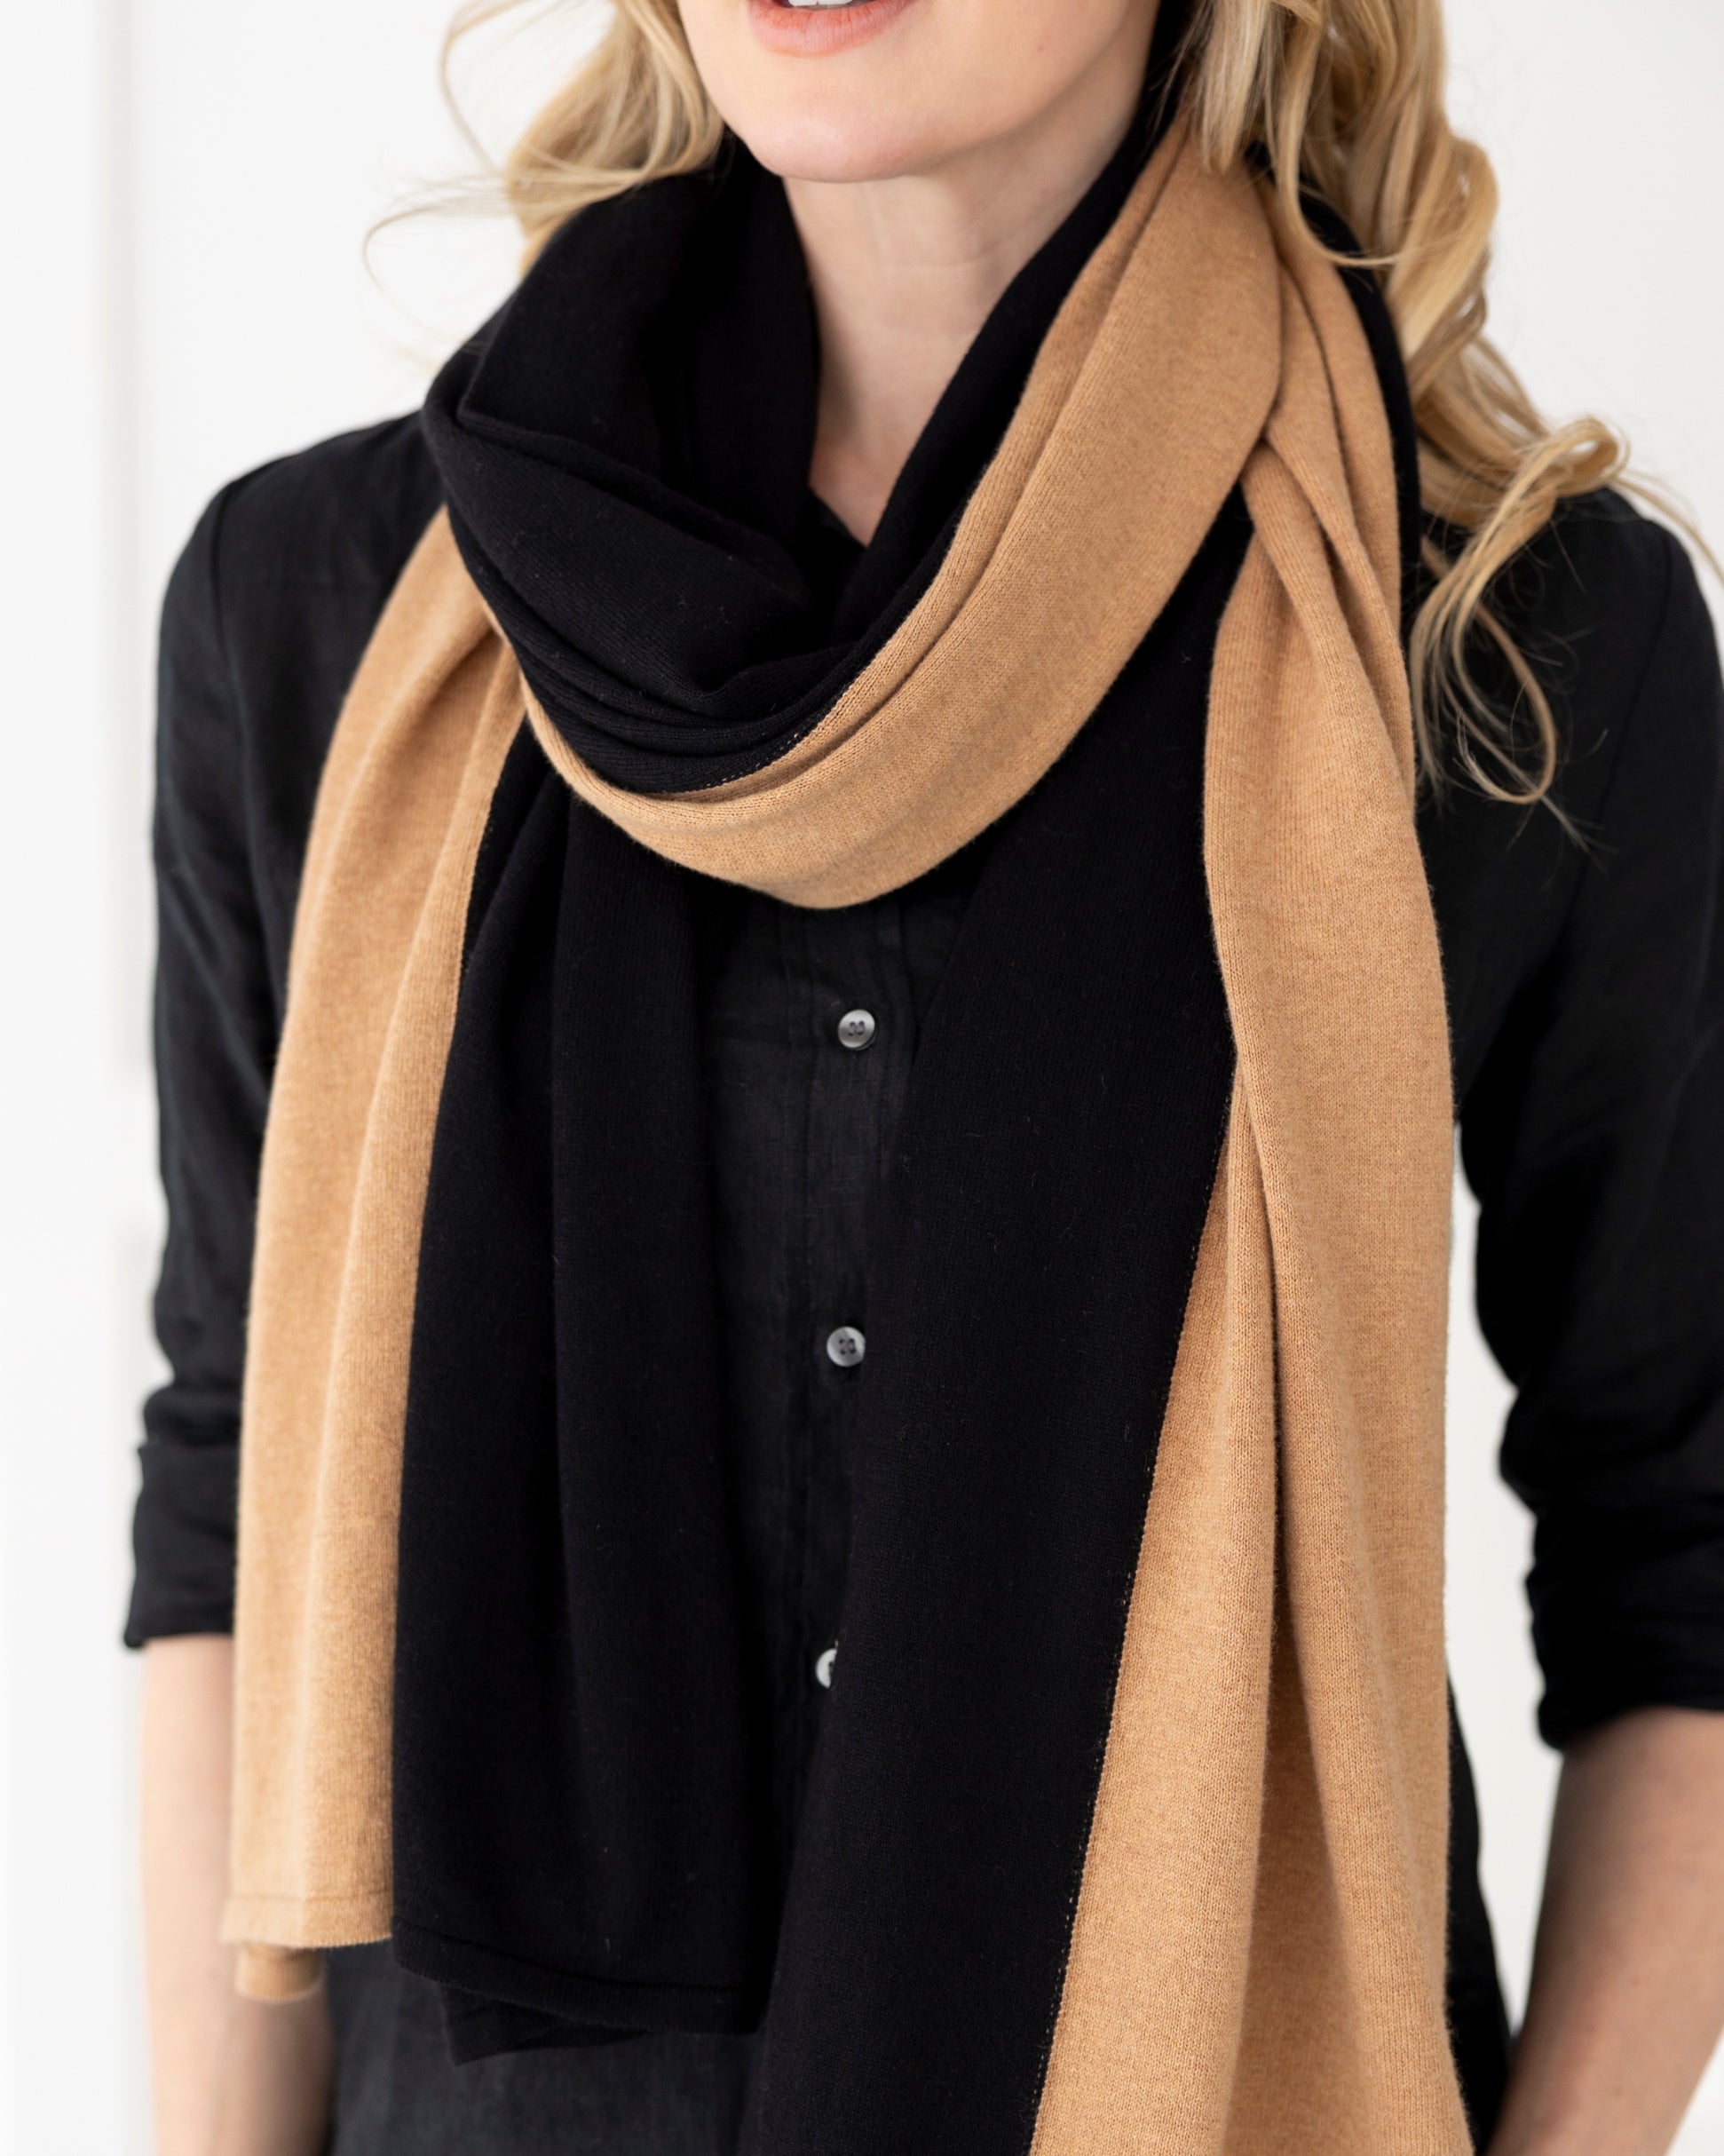 Woman wearing the Cashmere Cotton Luxe Travel Scarf in Black and Camel, which is a beige